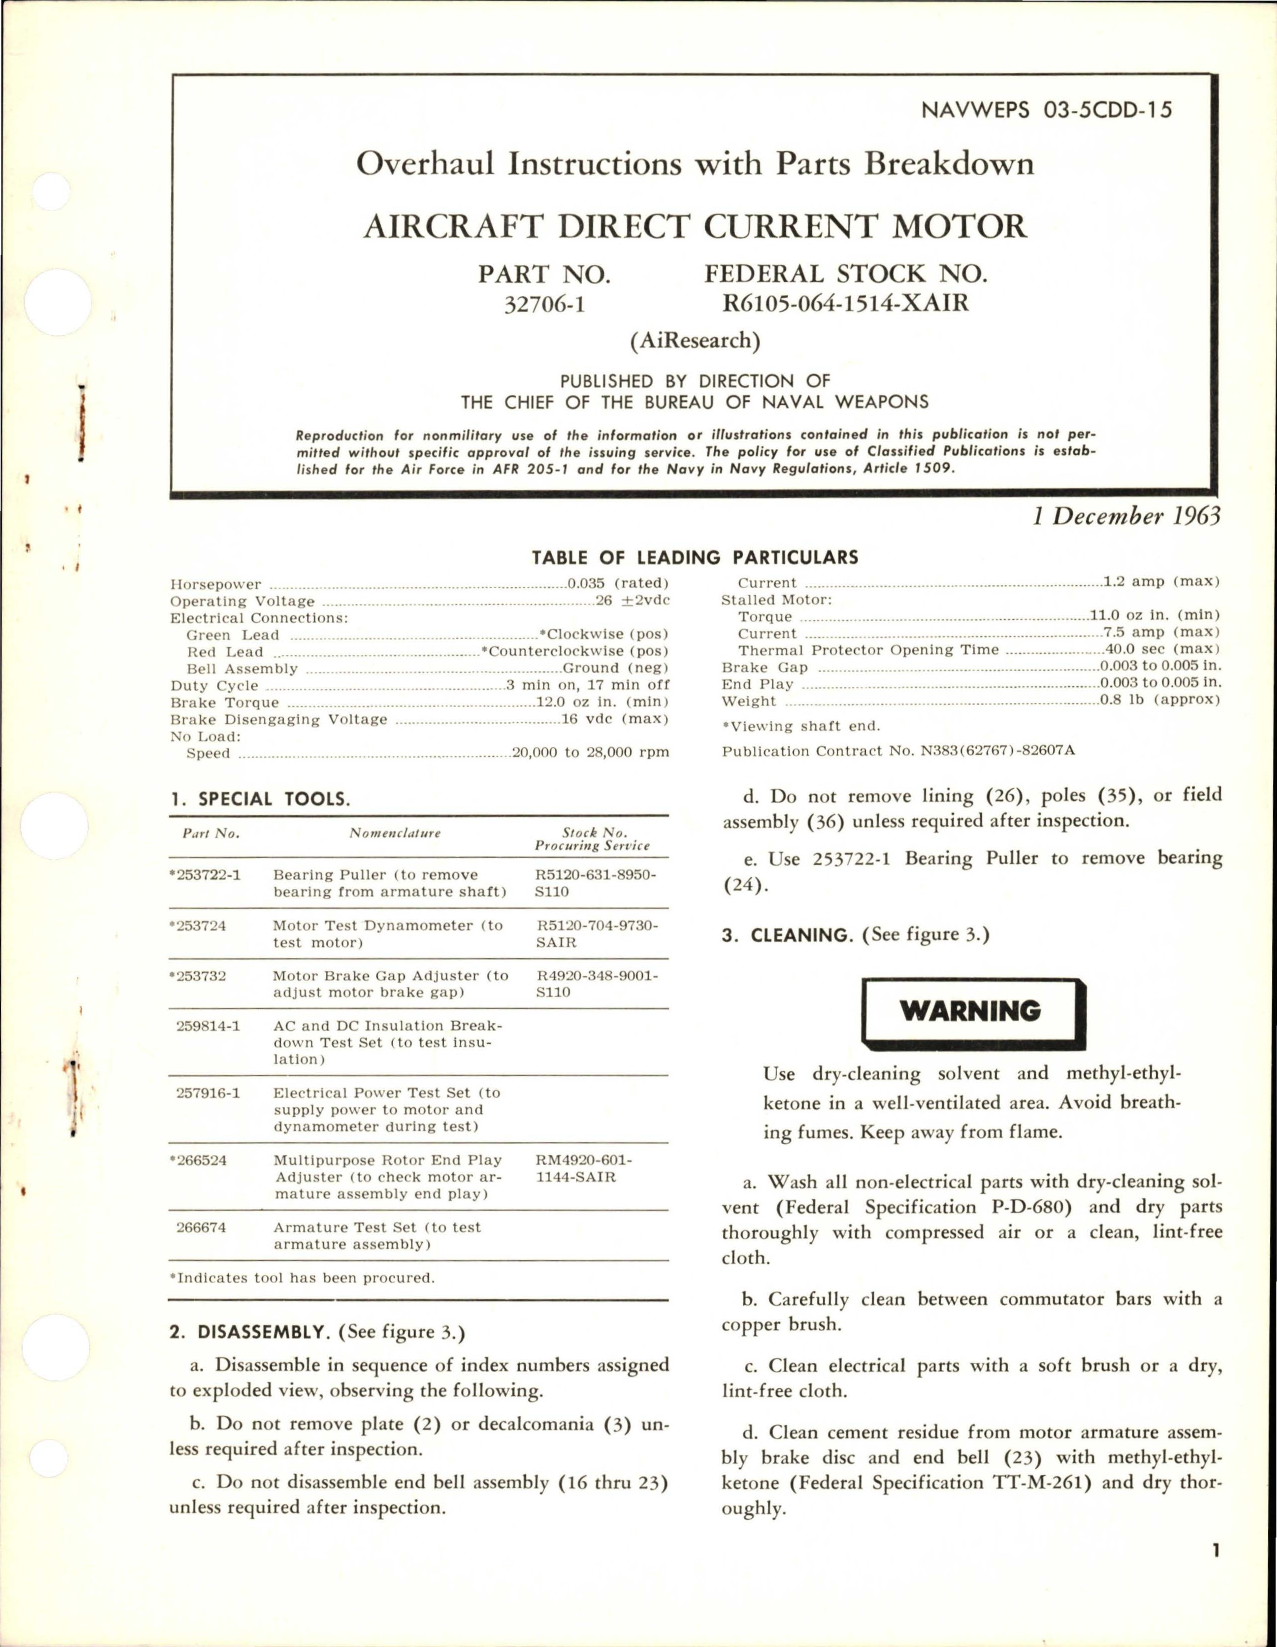 Sample page 1 from AirCorps Library document: Overhaul Instructions with Parts Breakdown for Direct Current Motor - Part 32706-1